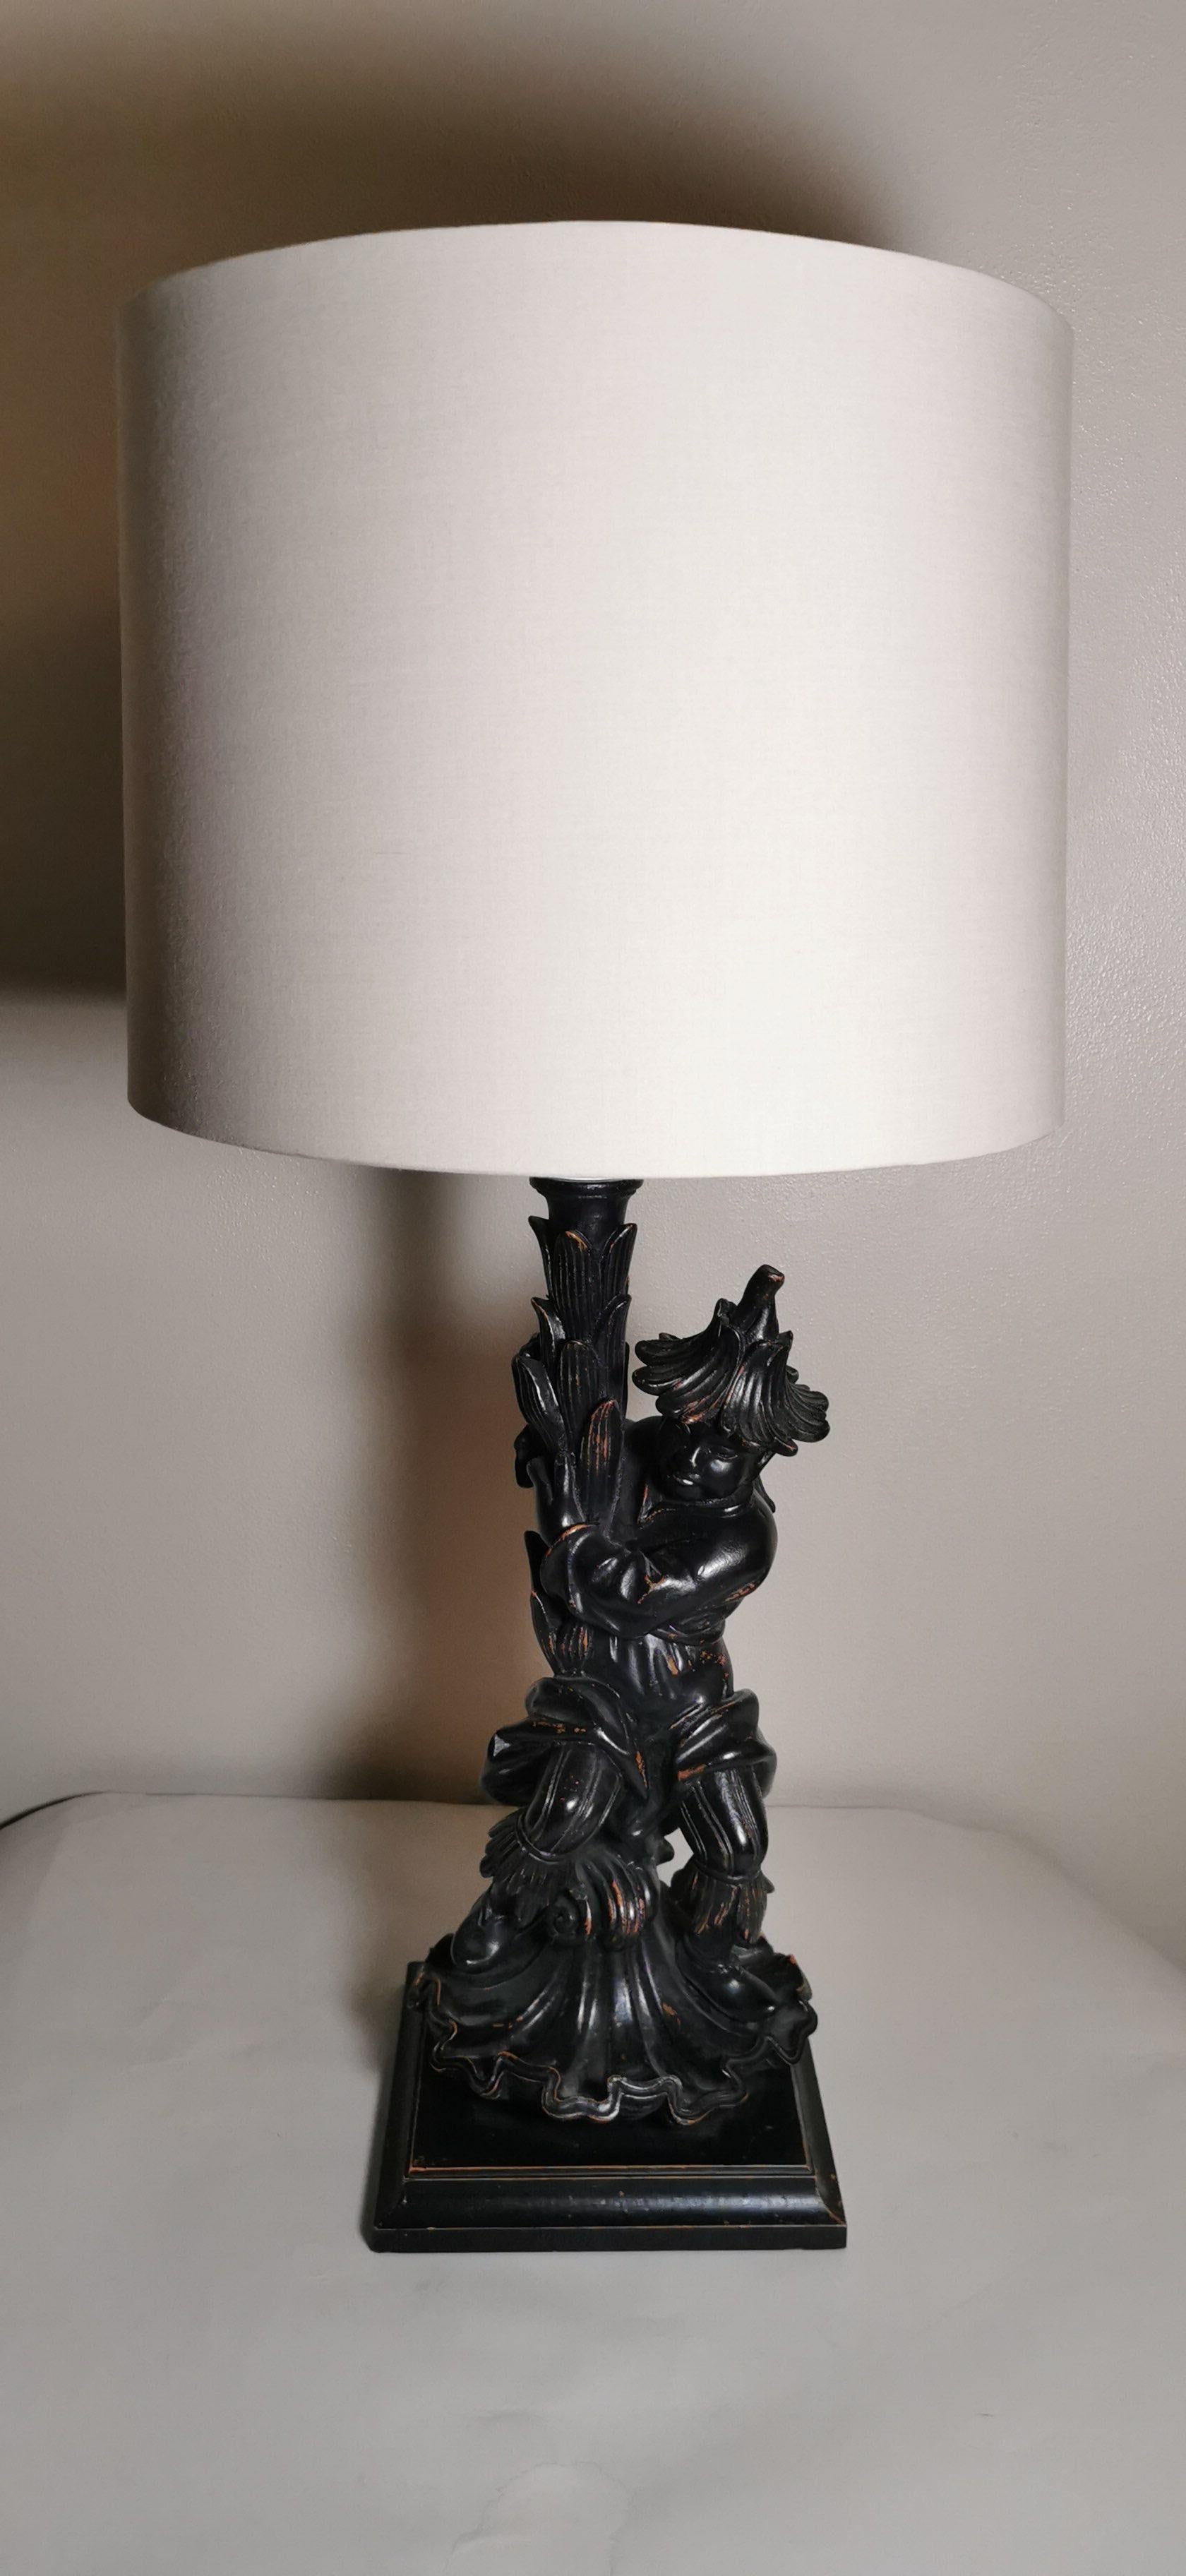 Elegant and exotic engraved and antiqued wood lamp portraying an oriental character. 
This lamp is part of a set of two.

This lamp comes without the lampshade.

Artecornici design produces hand colored art prints, artisan frames, lightings,